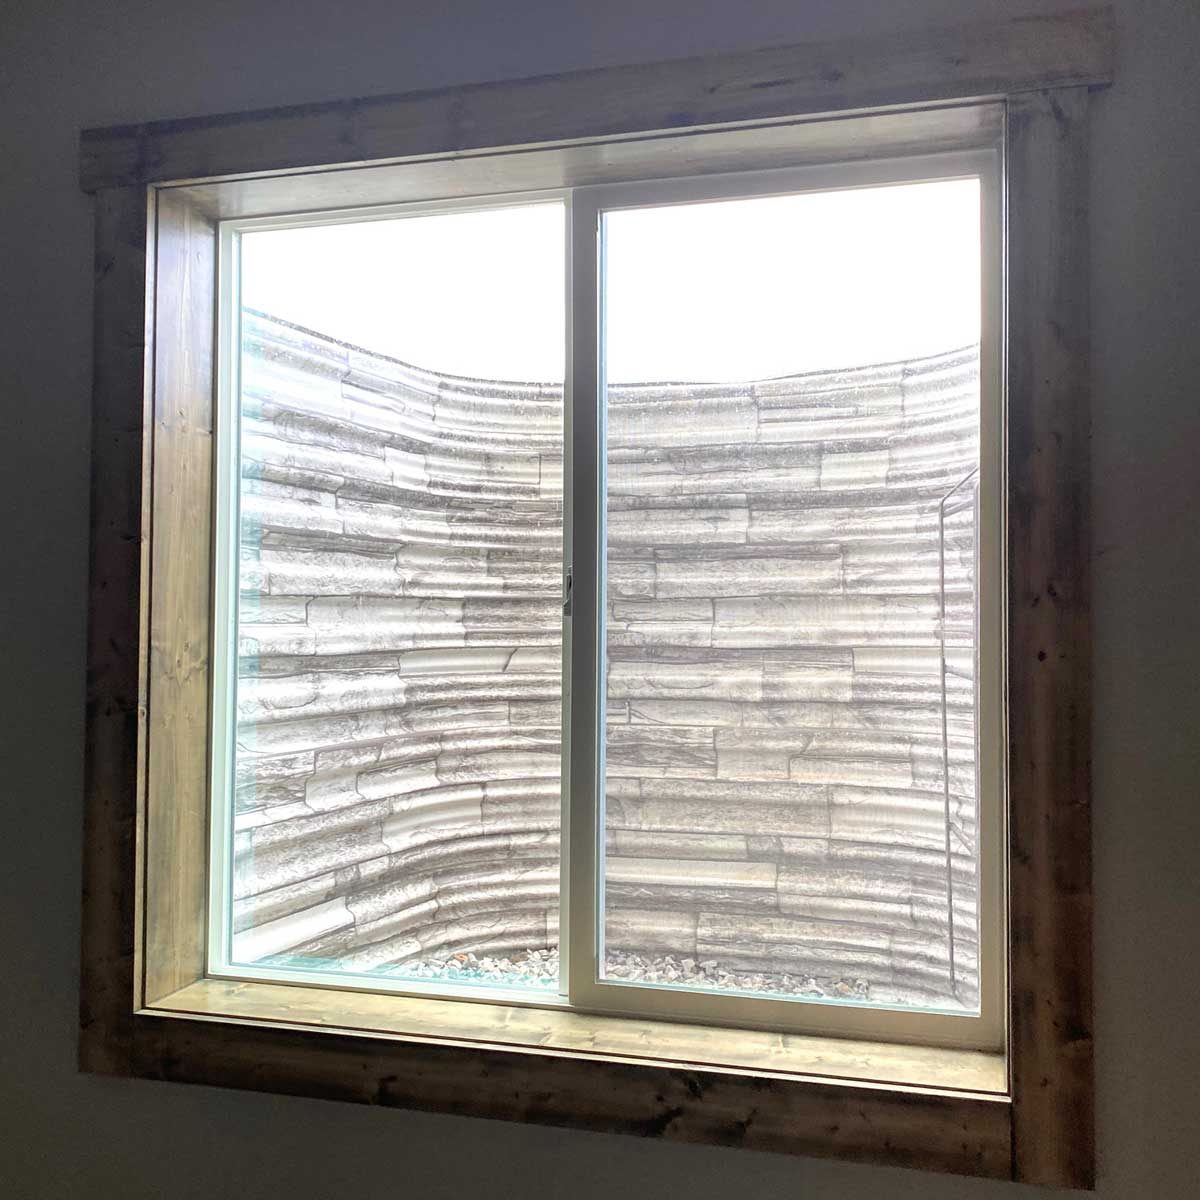 What You Need to Know About Egress Windows